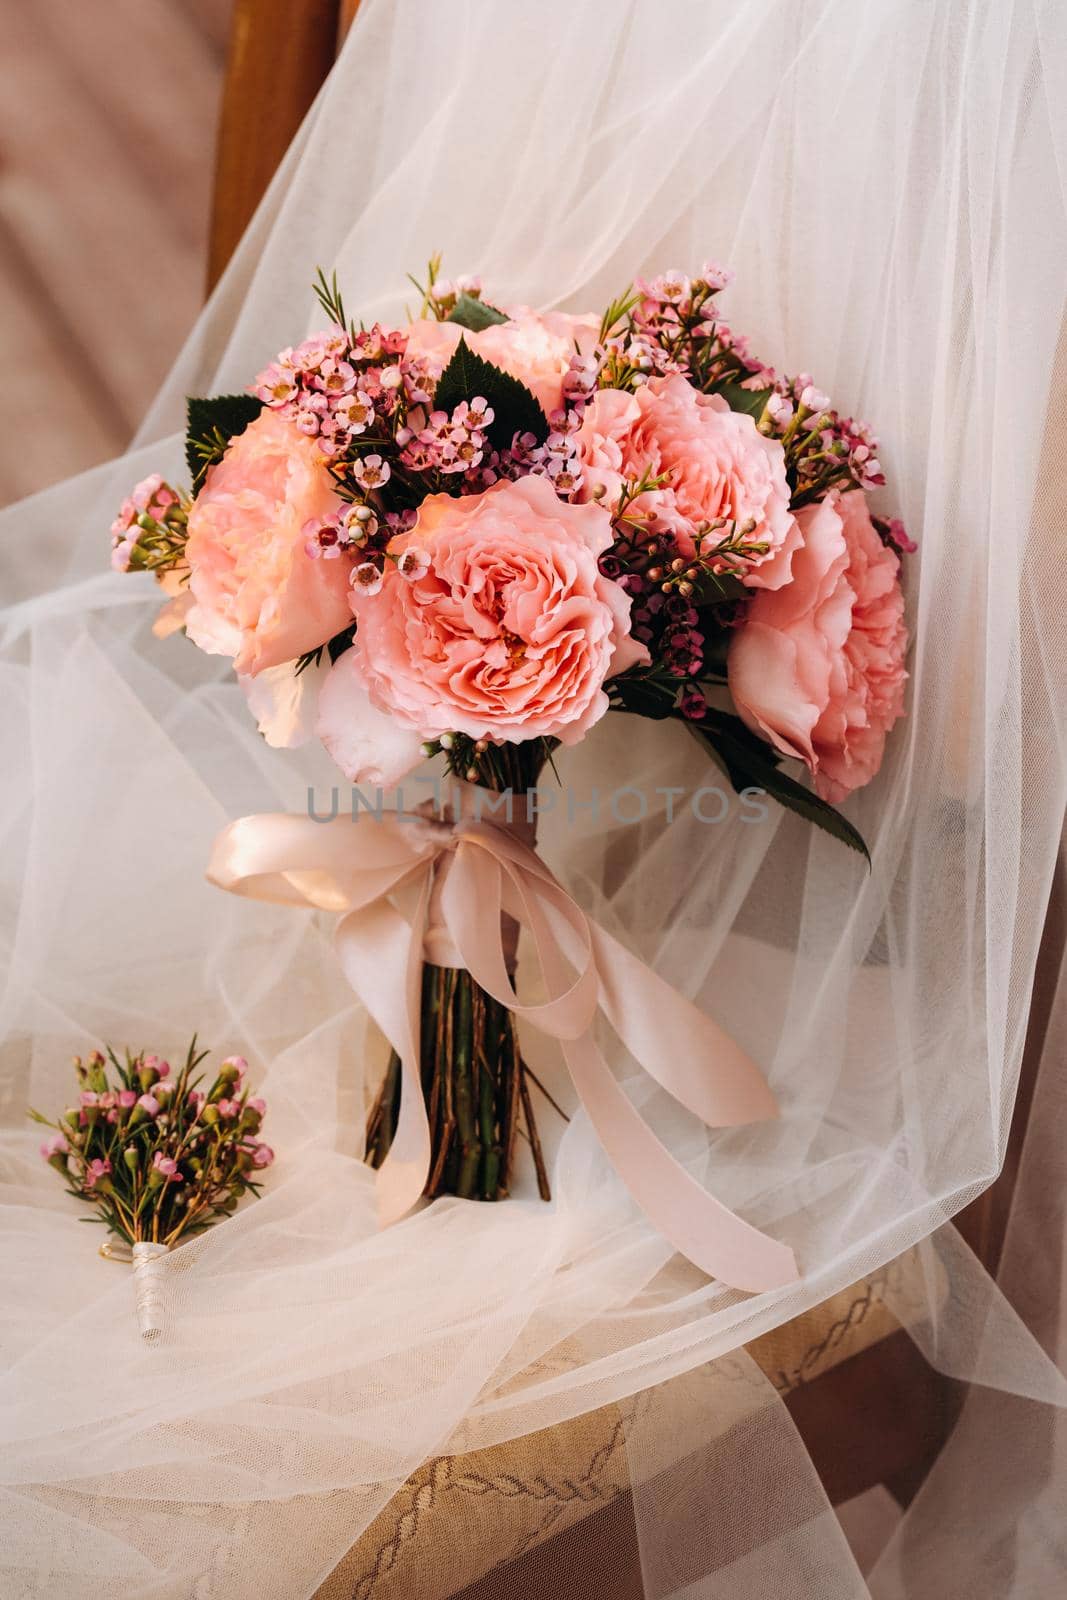 wedding bouquet with roses and boutonniere.The decor at the wedding by Lobachad